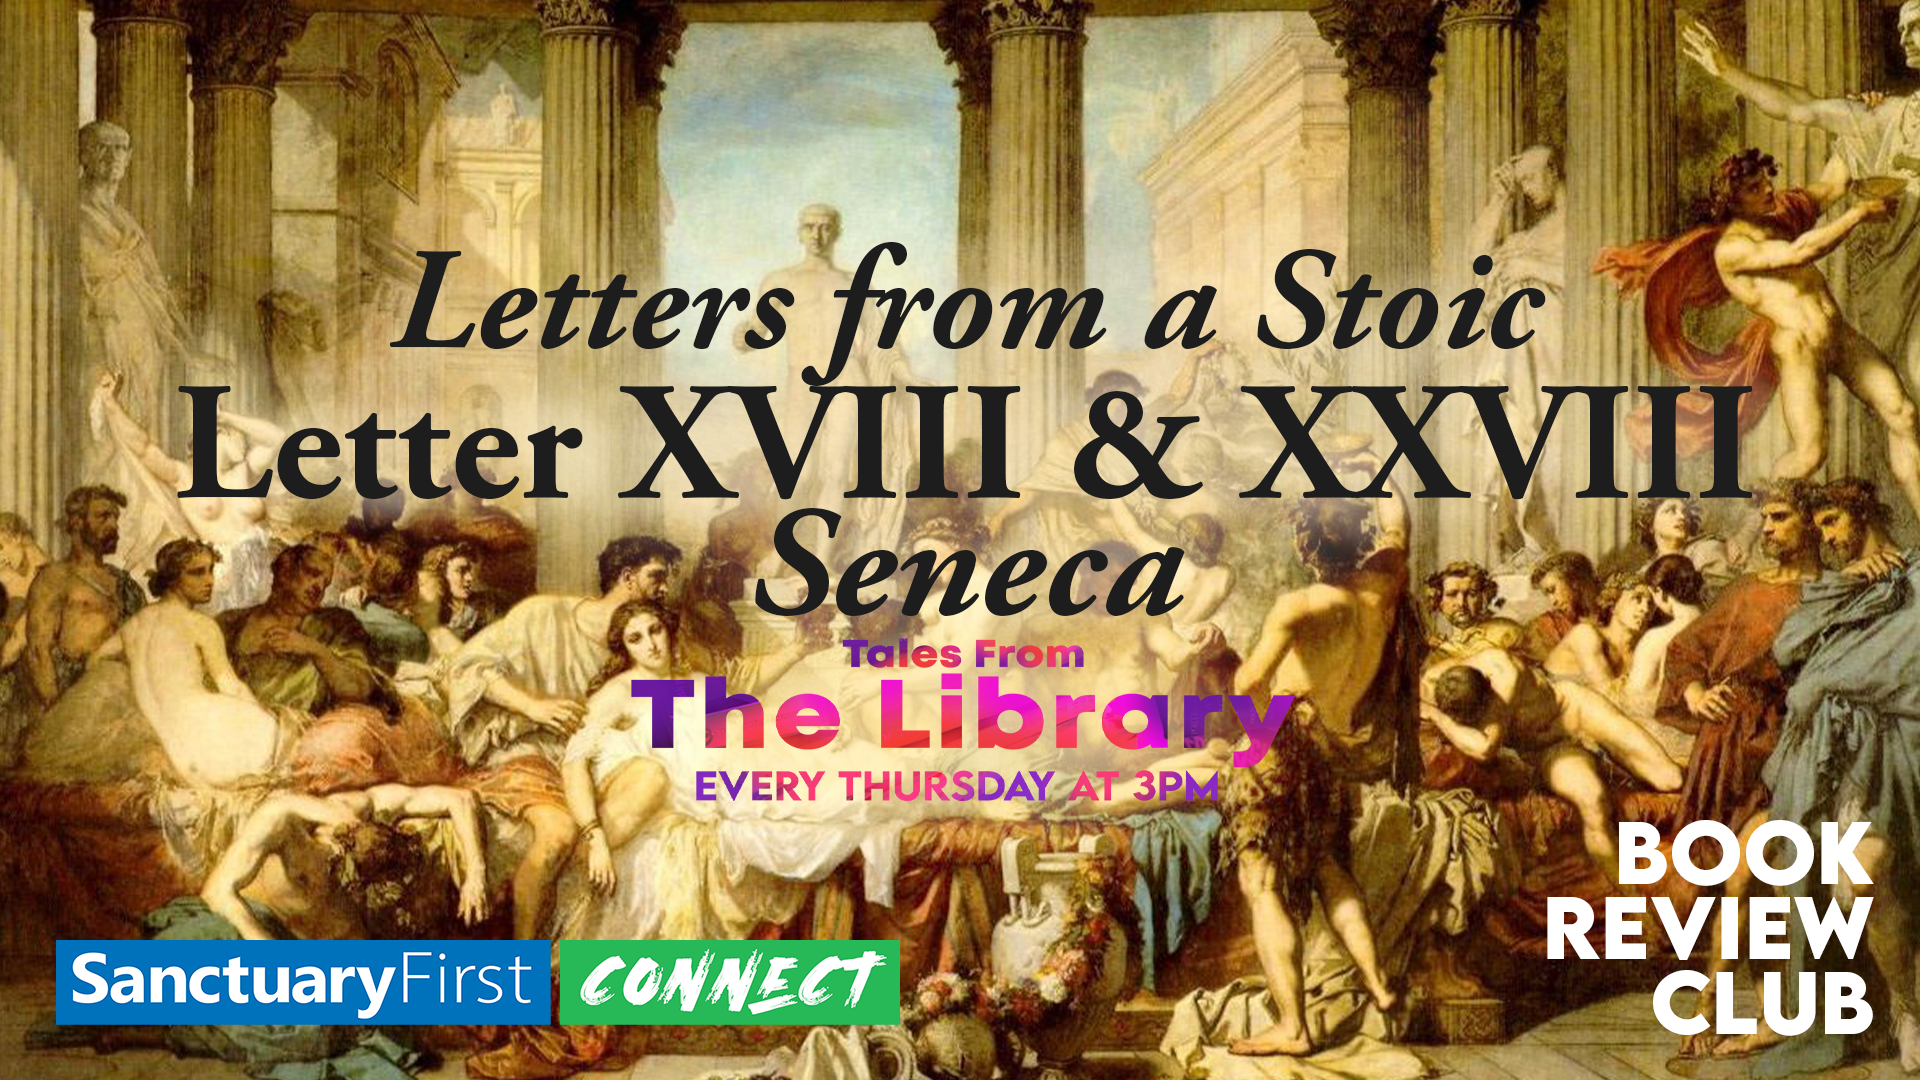 Tales From The Library - Letters from a Stoic